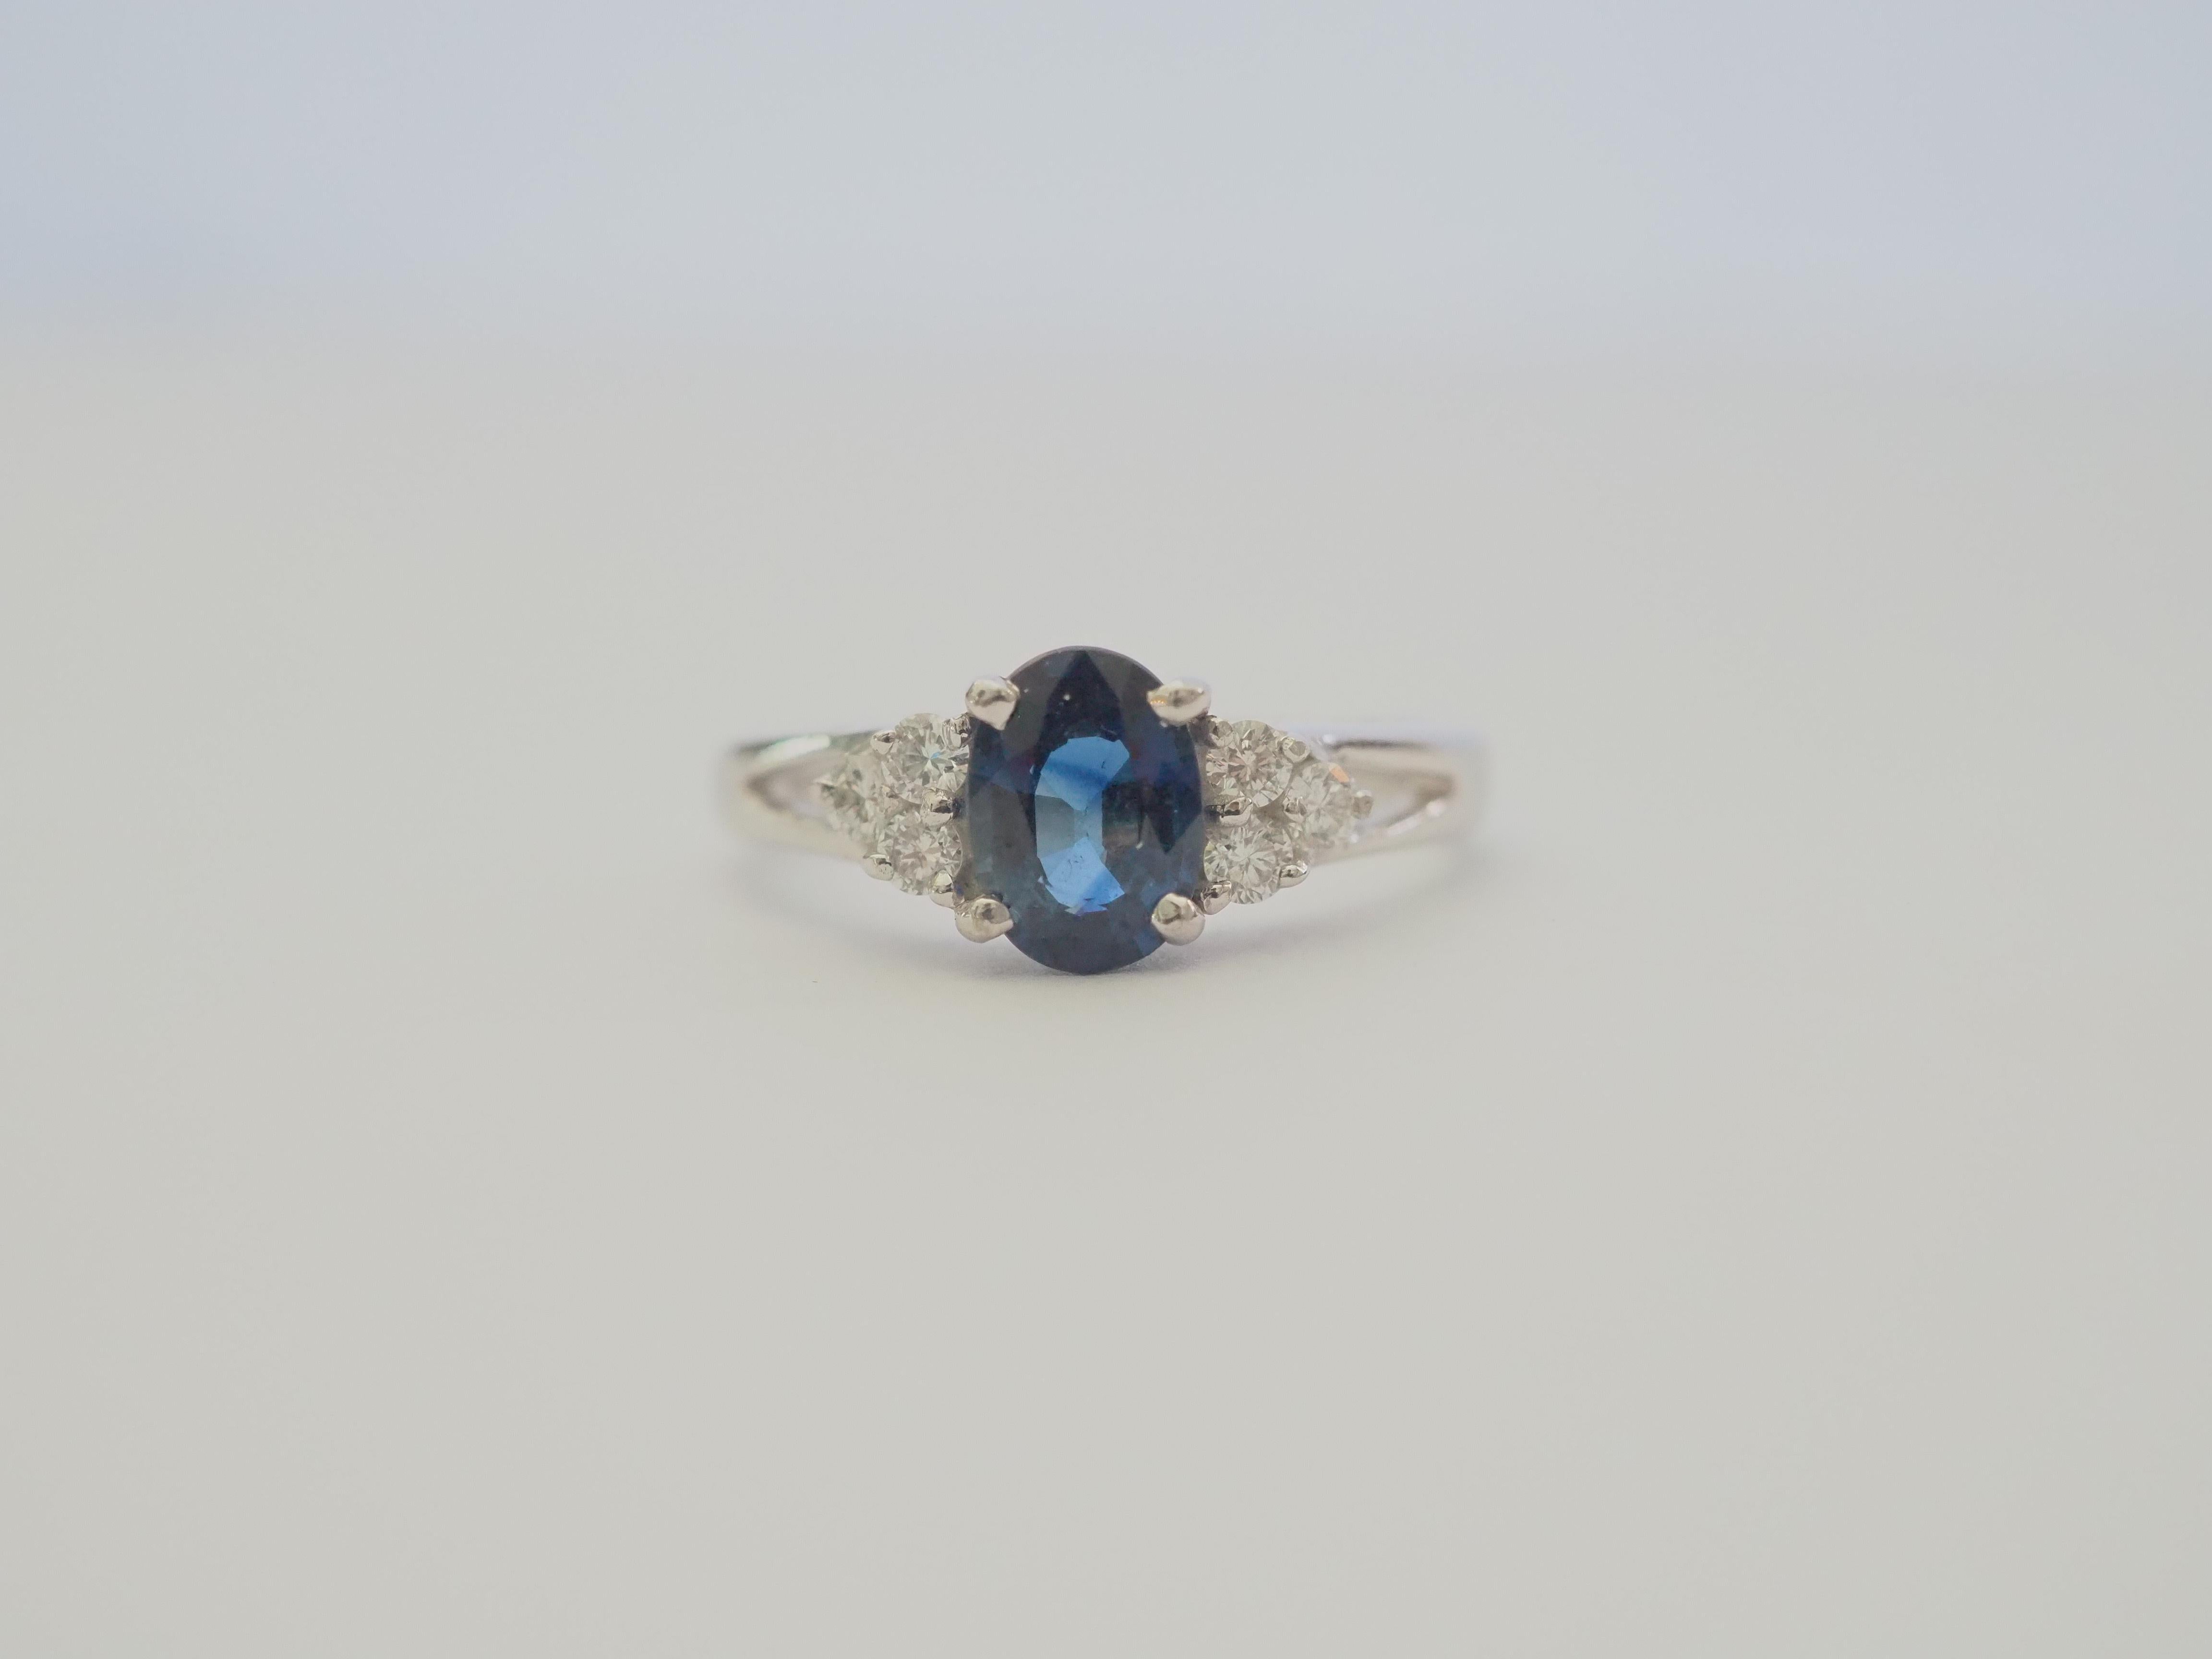 This beautiful engagement ring boasts a very stunning and eye clean blue sapphire with clear and colorless round brilliant cut diamonds! There are 6 round cut diamonds on the accent of the ring, set nicely. The diamonds are of good quality and is